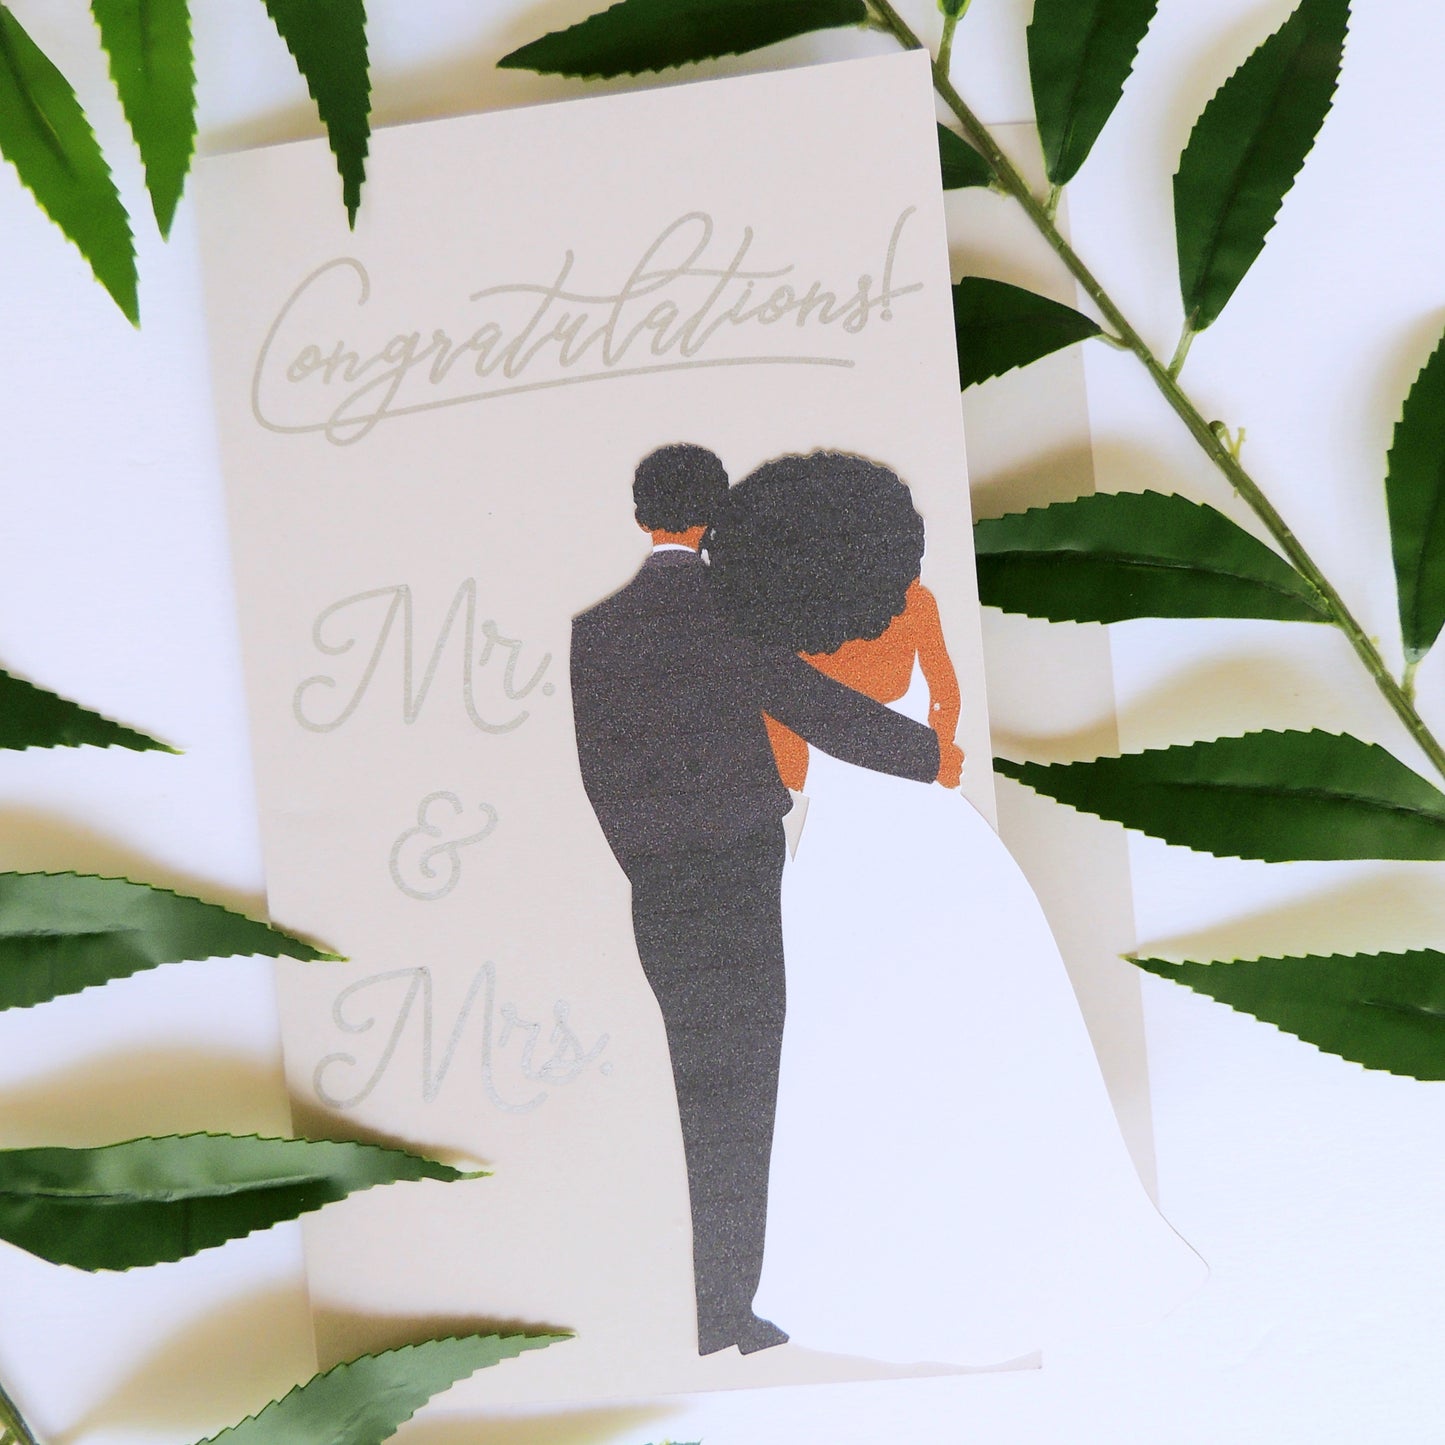 Newly Wed Greeting Card